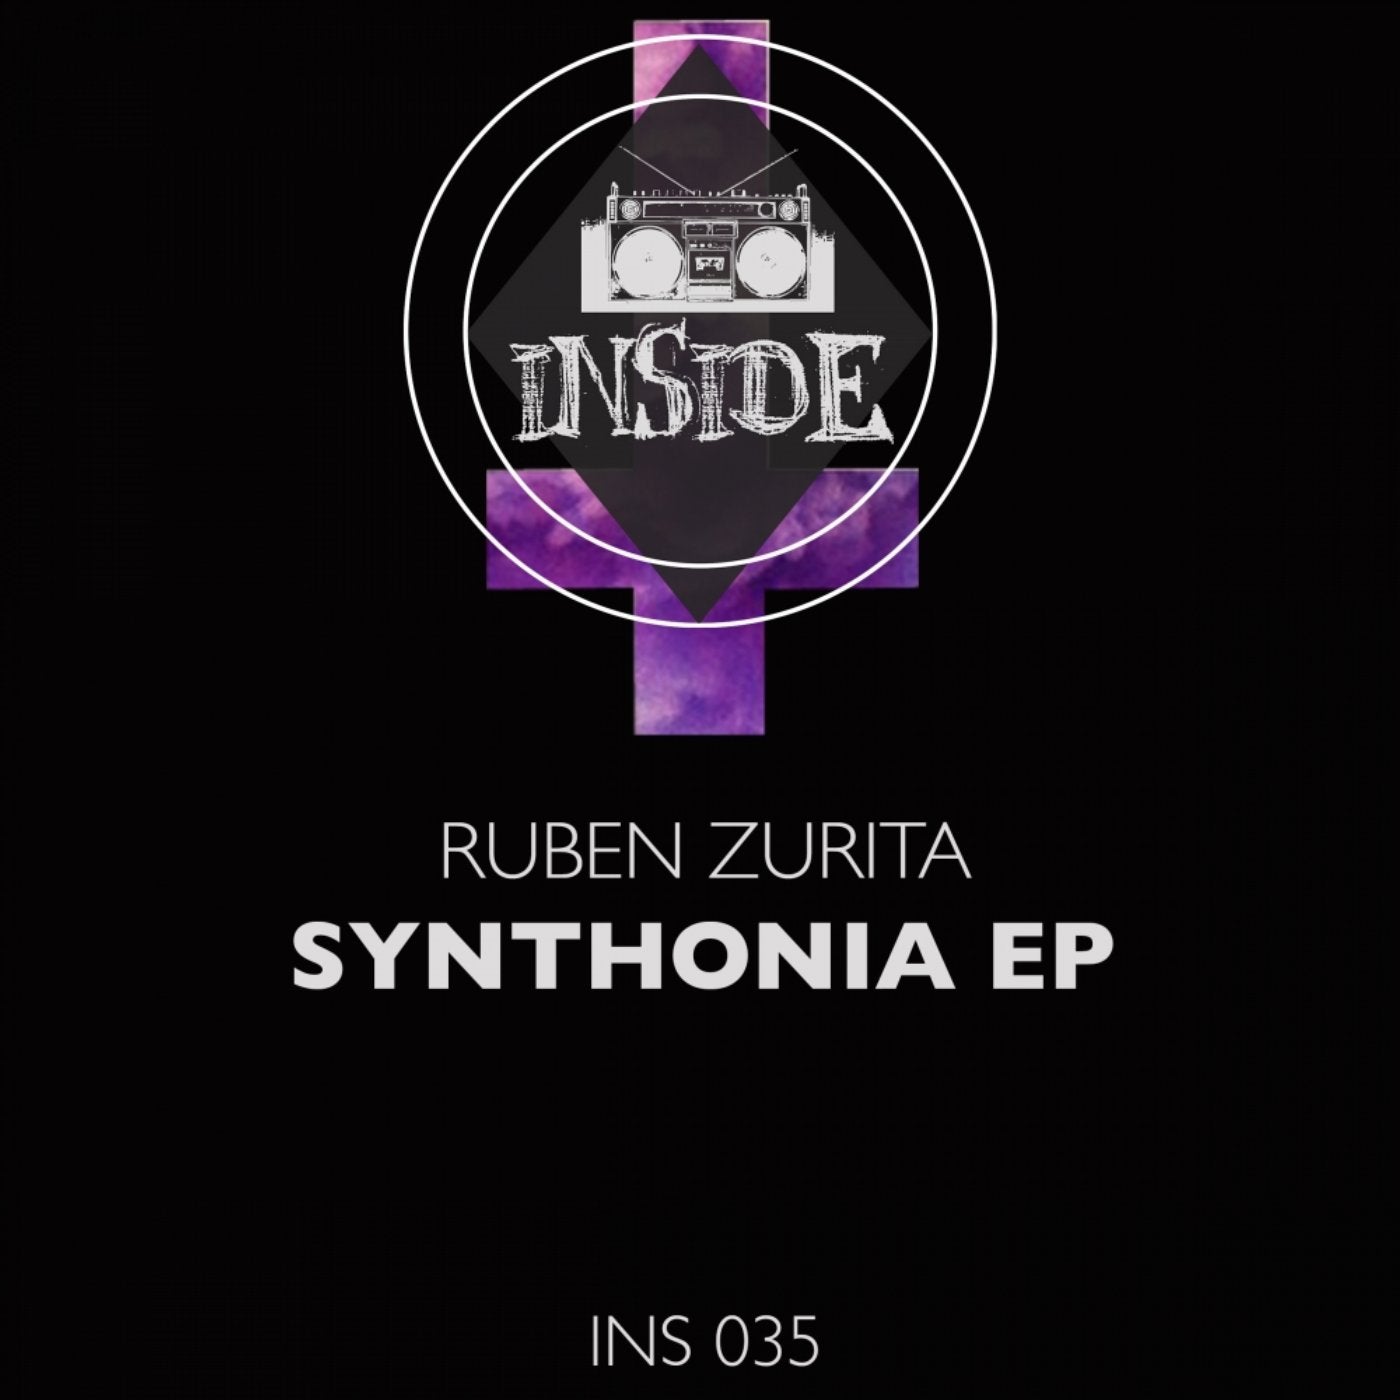 Synthonia EP